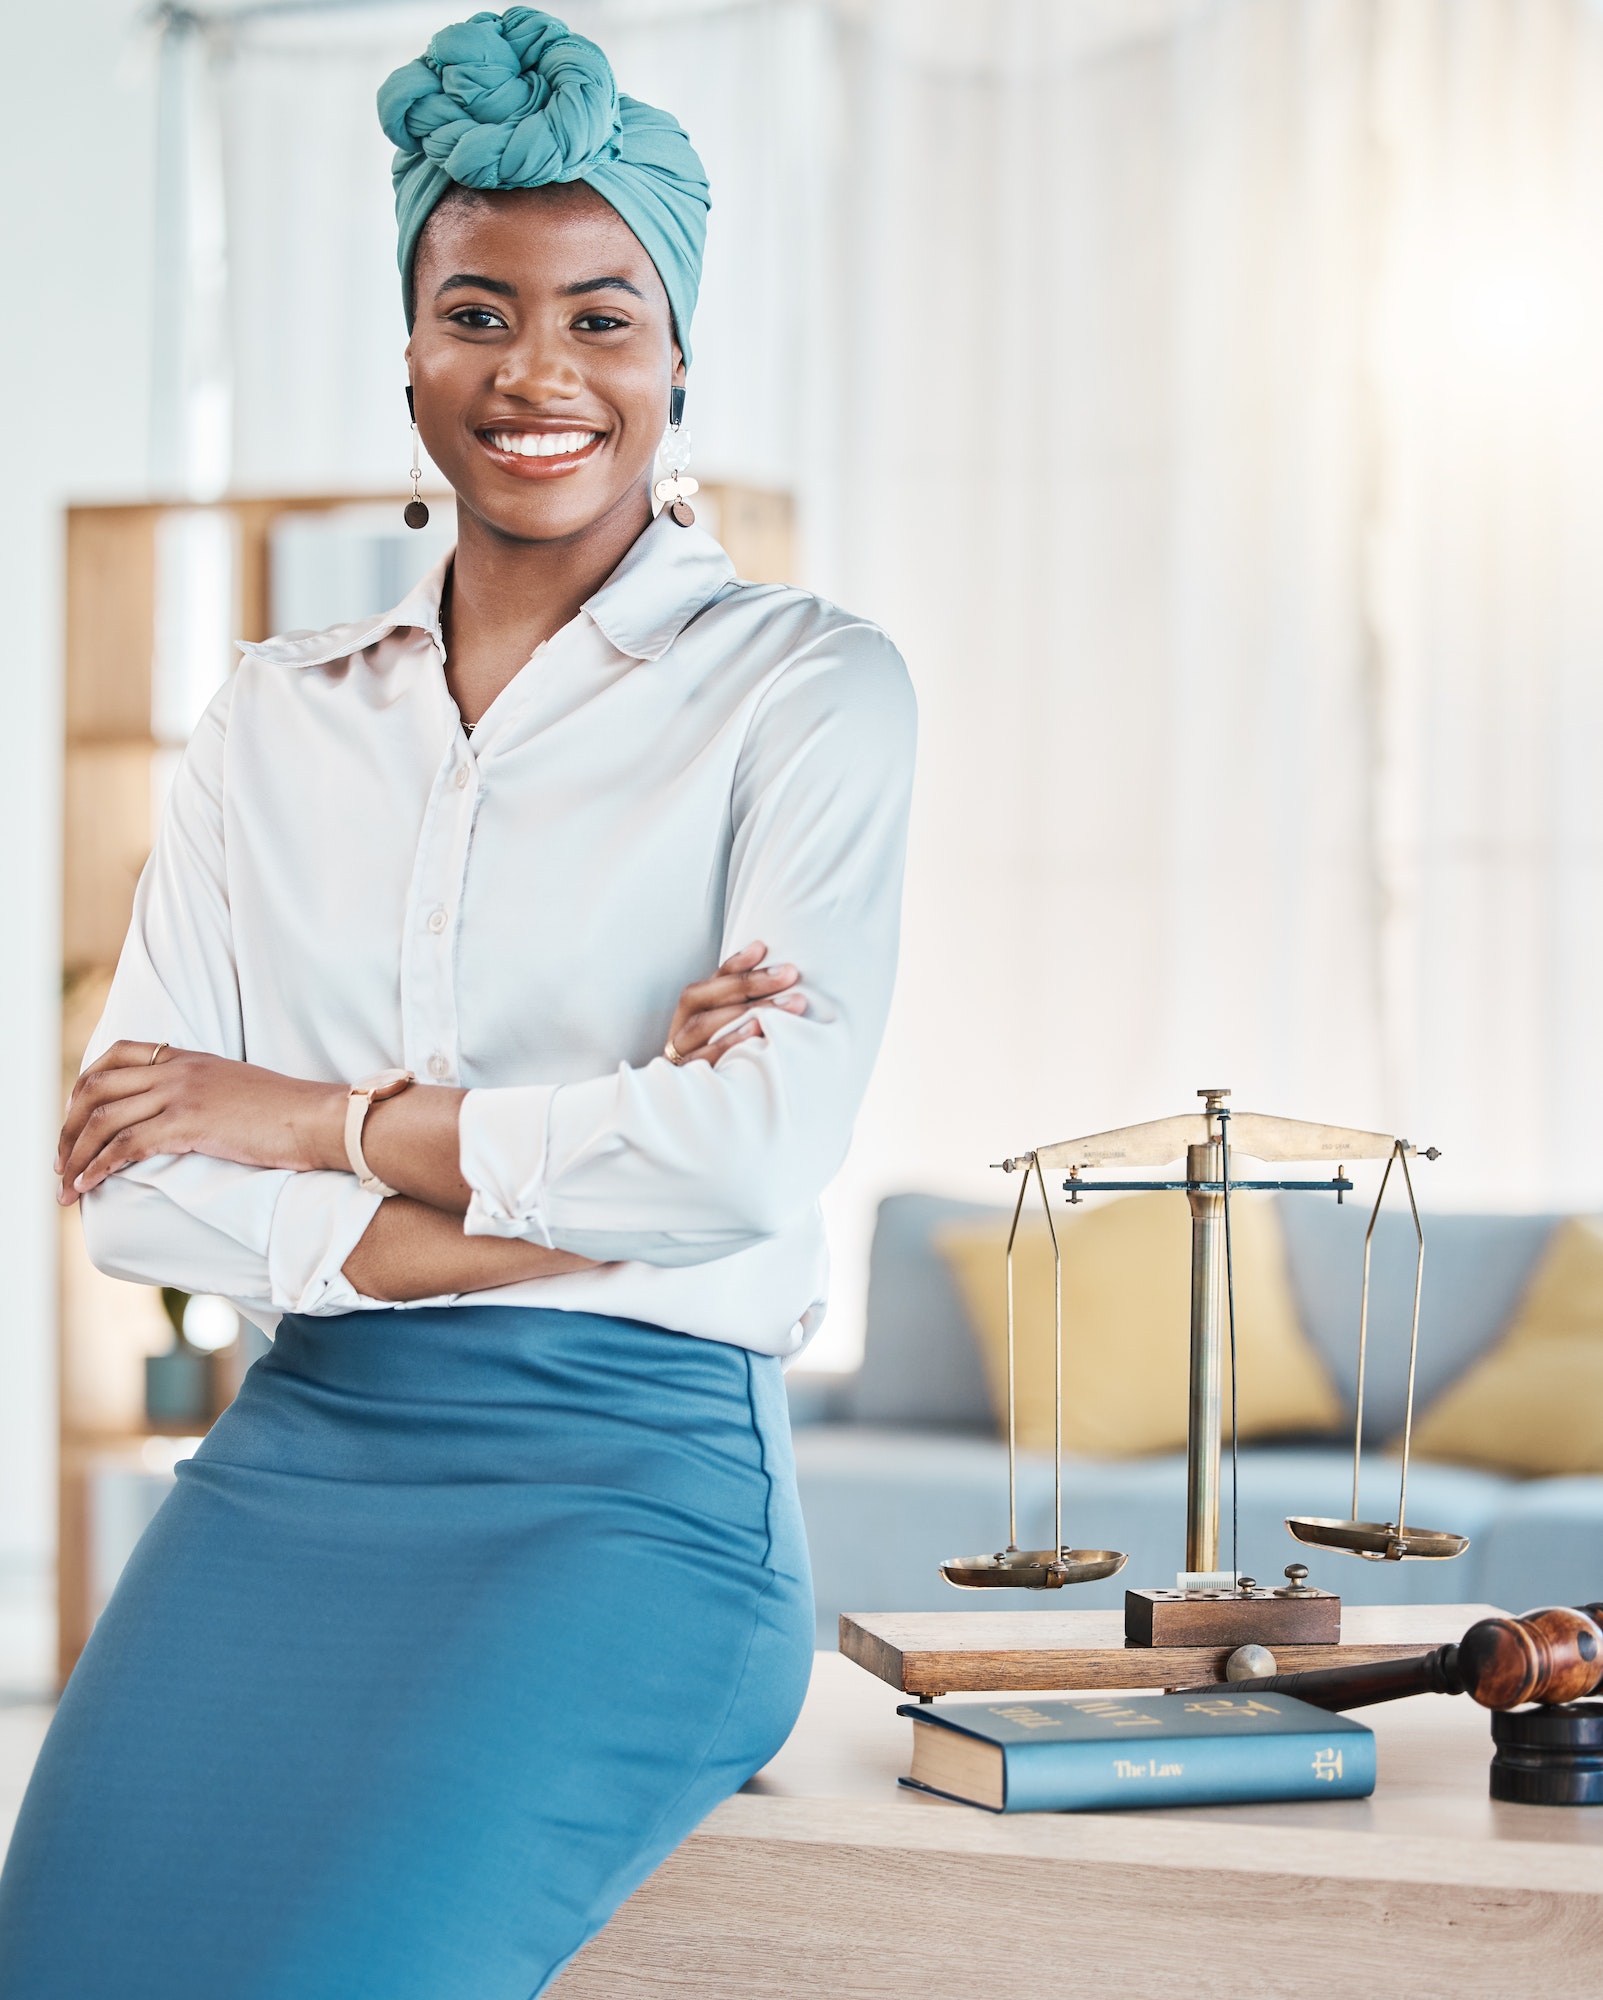 Legal pride, portrait and a black woman with arms crossed at work for professional job as a lawyer.